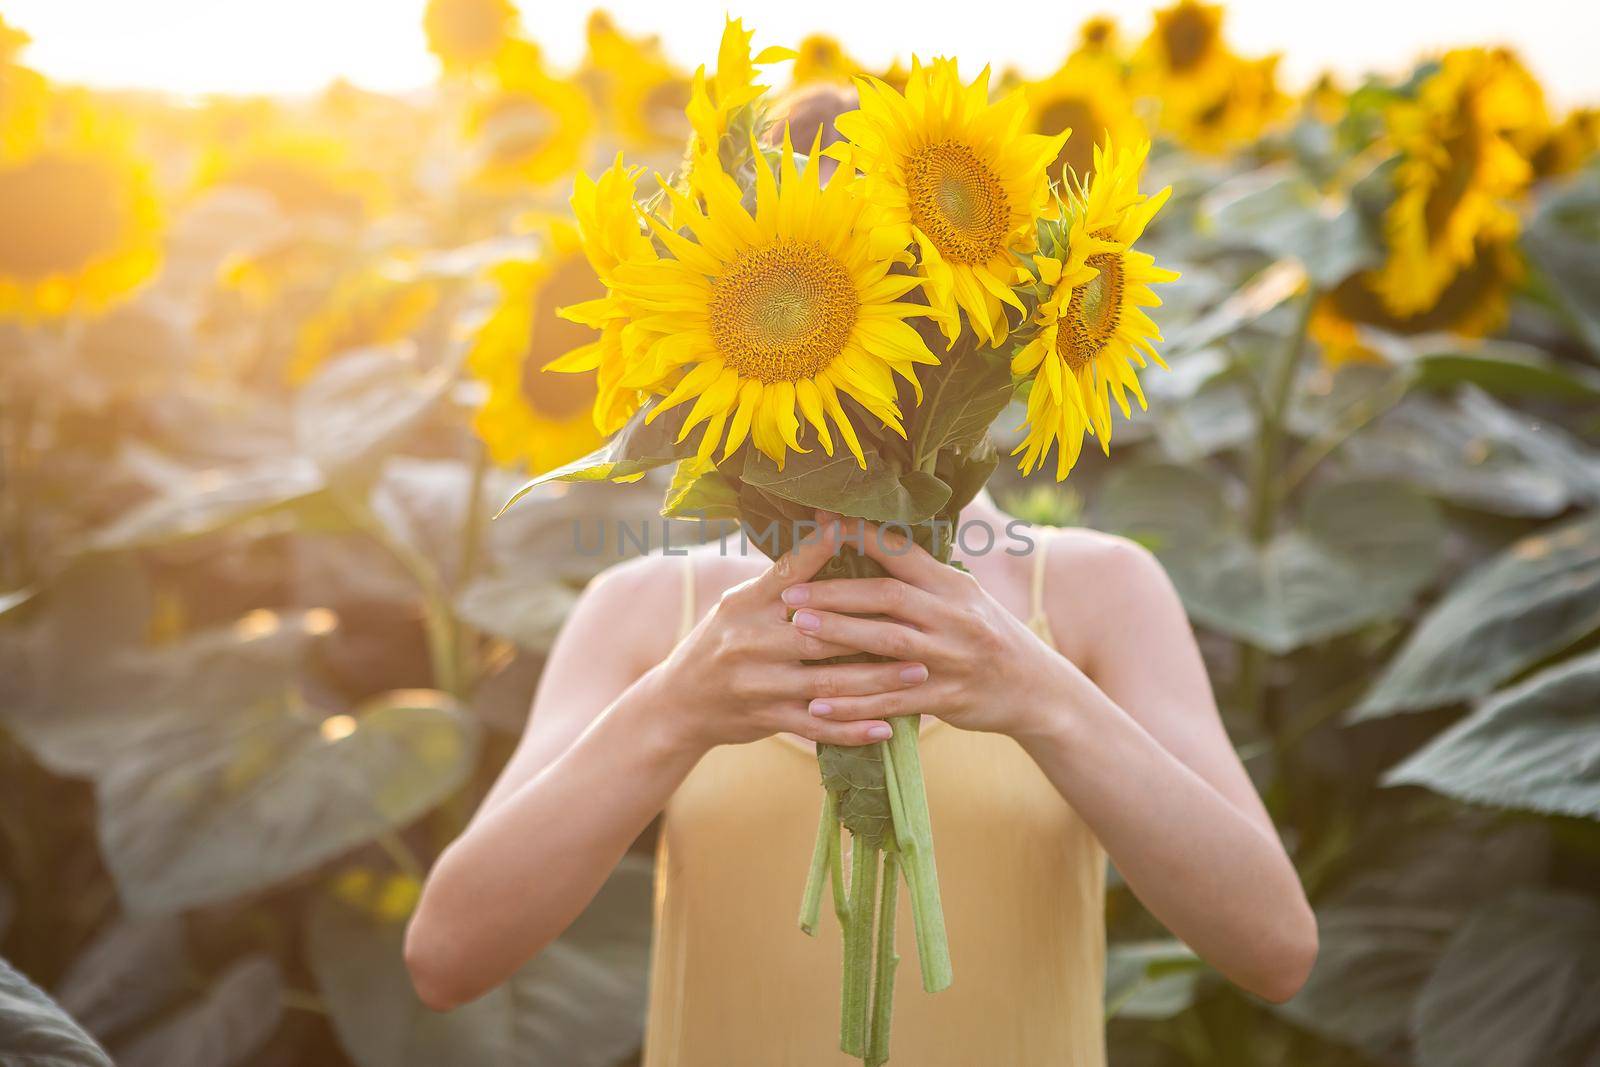 Female hand in a large field of sunflowers holding a large bouquet of sunflowers in the field